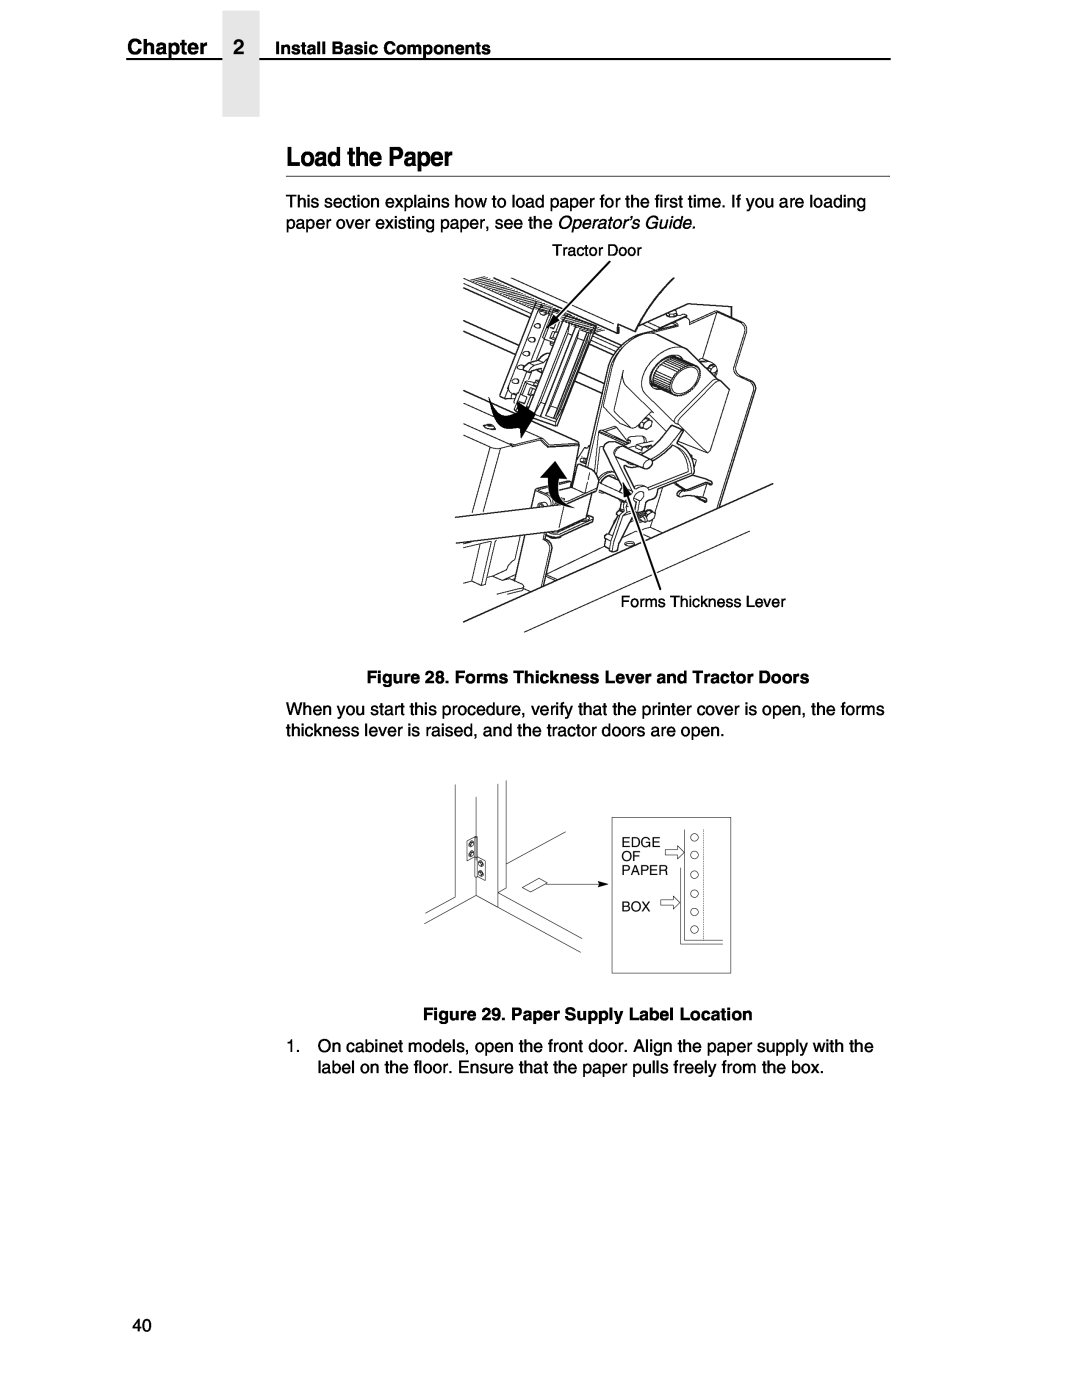 Compaq P5000 Series setup guide Load the Paper, Forms Thickness Lever and Tractor Doors, Paper Supply Label Location 